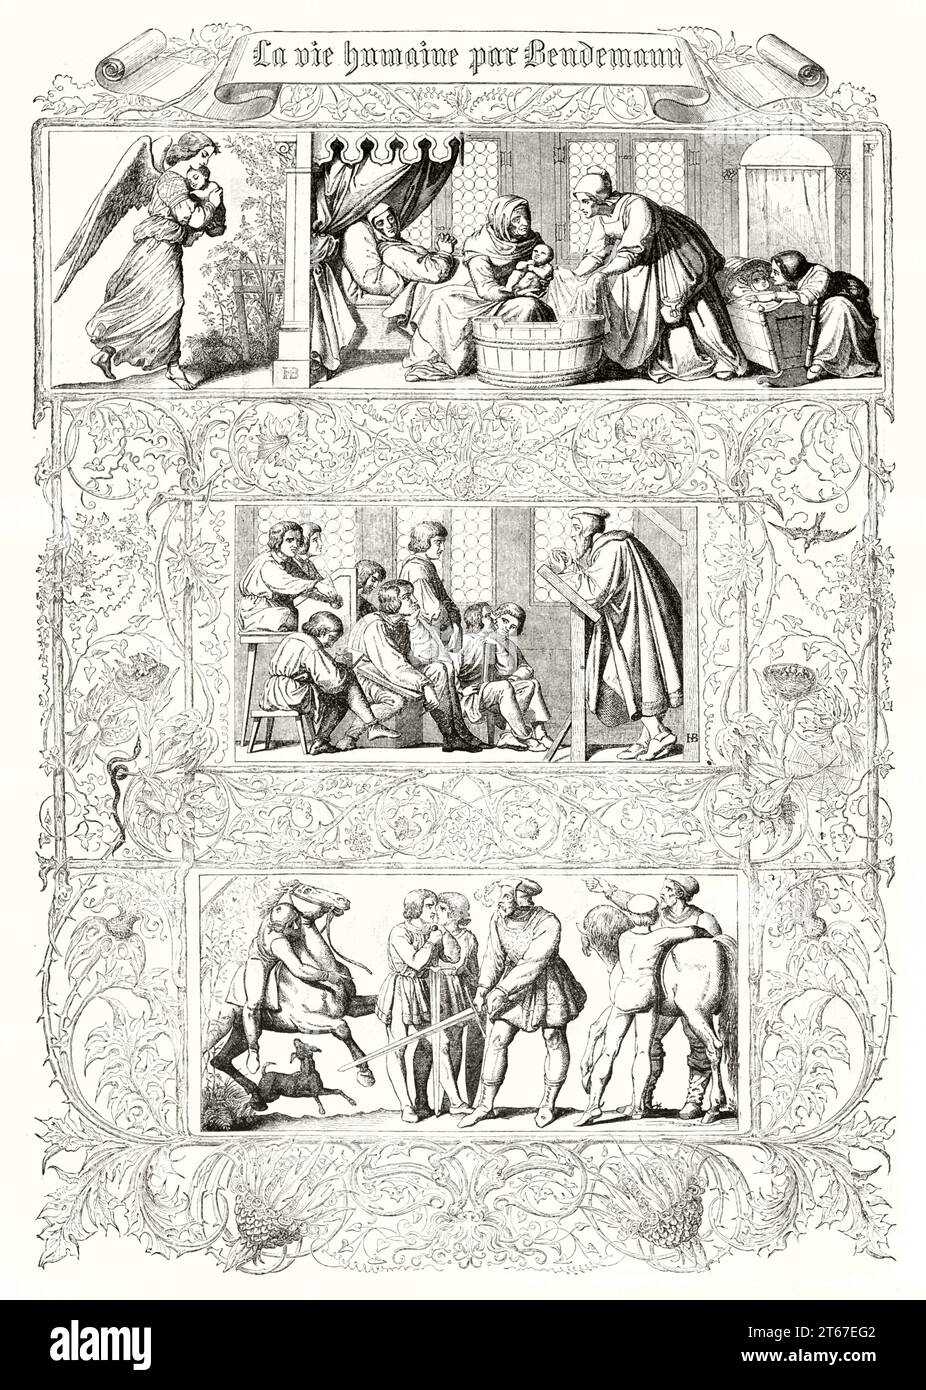 Old engraved reproduction of frescoes in throne room of Dresden Royal Palace. By Gagniet after Bendemann, publ. on Magasin Pittoresque, Paris, 1851 Stock Photo